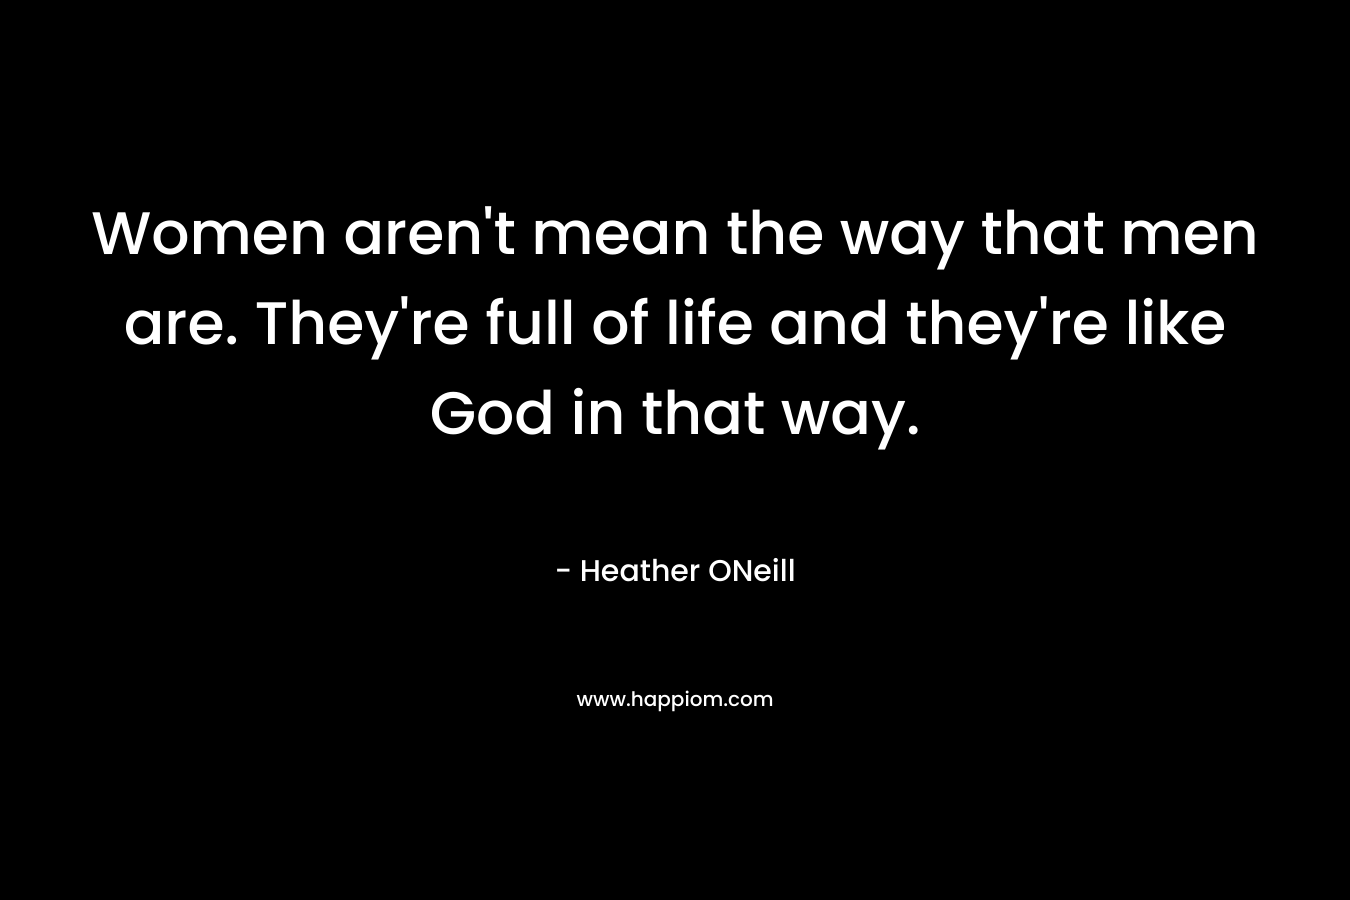 Women aren’t mean the way that men are. They’re full of life and they’re like God in that way. – Heather ONeill